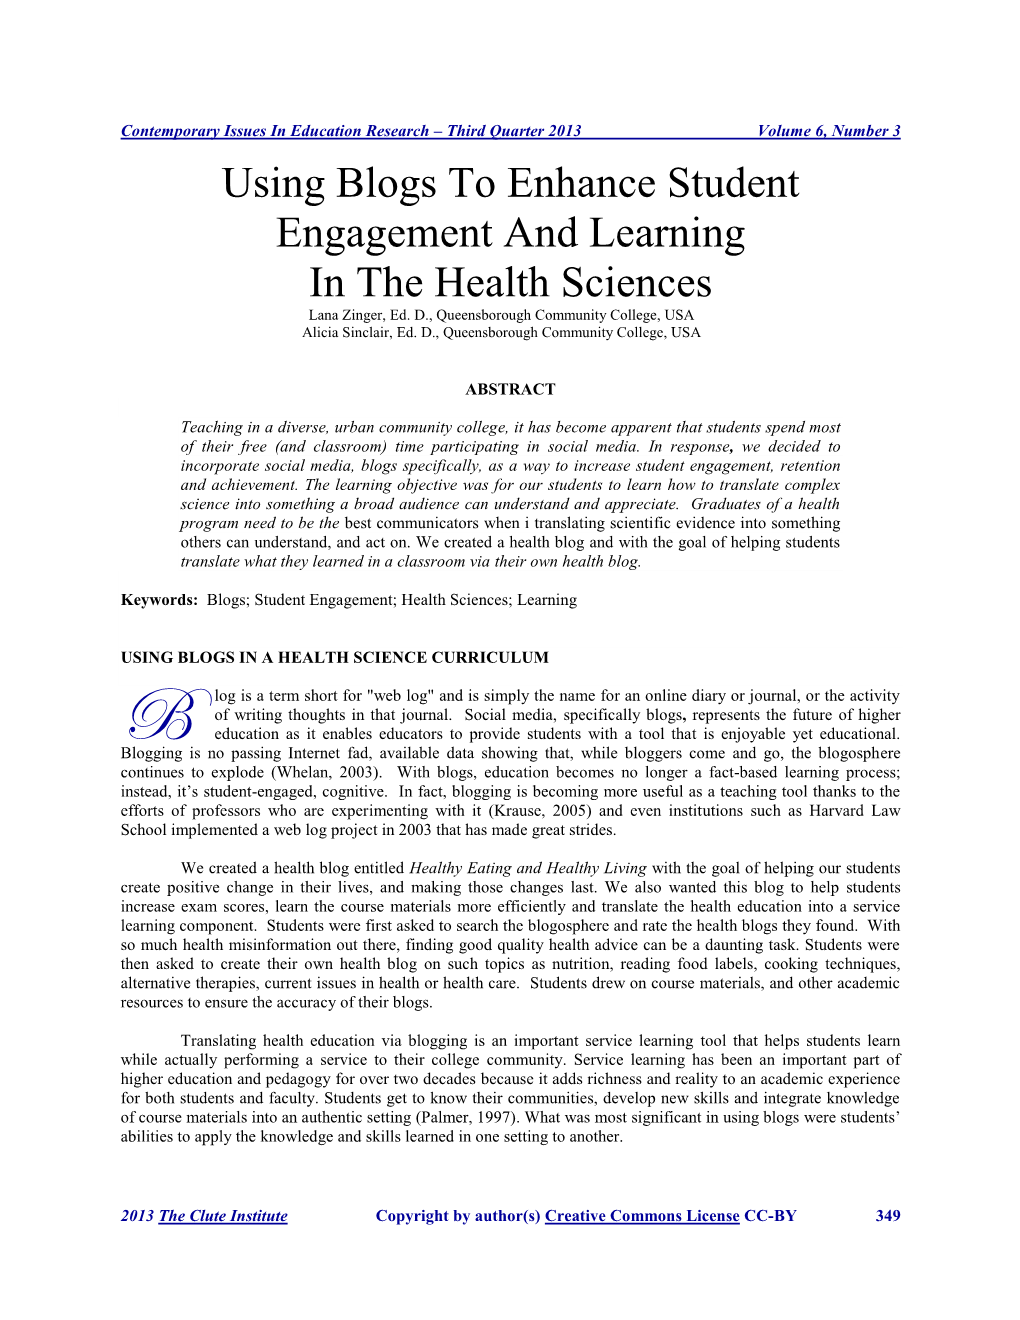 Using Blogs to Enhance Student Engagement and Learning in the Health Sciences Lana Zinger, Ed